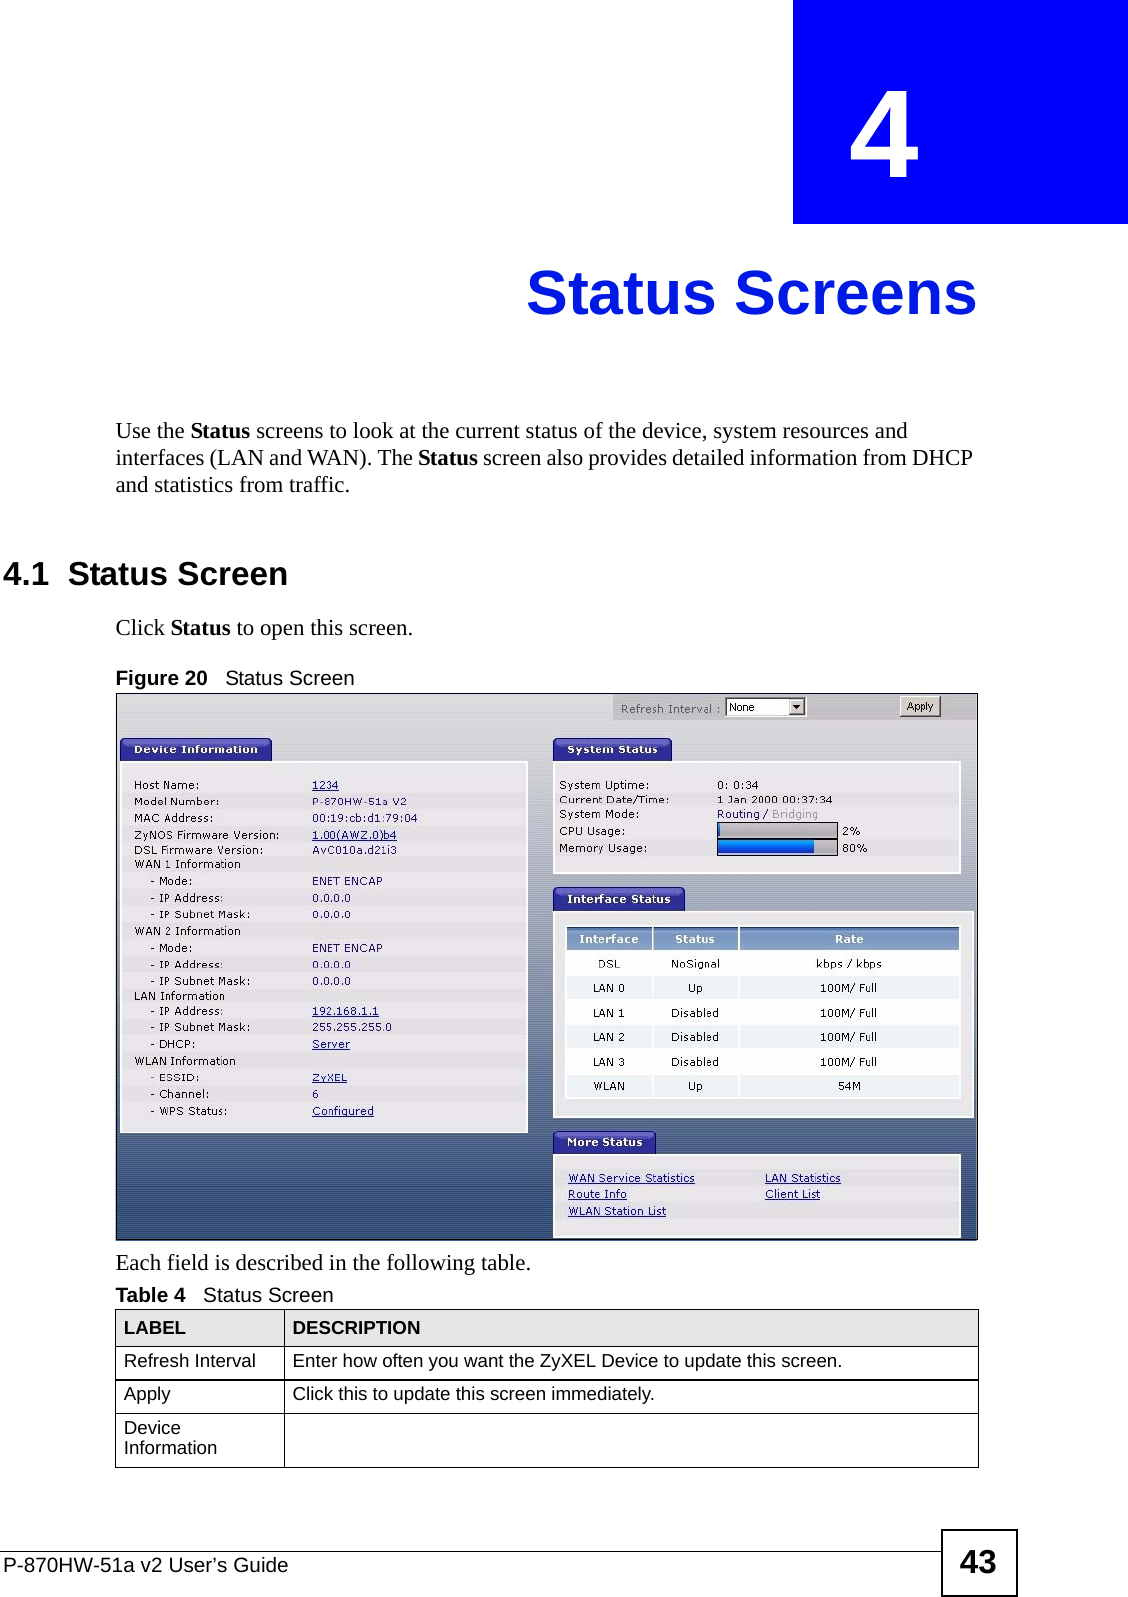 P-870HW-51a v2 User’s Guide 43CHAPTER  4 Status ScreensUse the Status screens to look at the current status of the device, system resources and interfaces (LAN and WAN). The Status screen also provides detailed information from DHCP and statistics from traffic.4.1  Status Screen Click Status to open this screen.Figure 20   Status ScreenEach field is described in the following table.Table 4   Status ScreenLABEL DESCRIPTIONRefresh Interval Enter how often you want the ZyXEL Device to update this screen.Apply Click this to update this screen immediately.Device Information